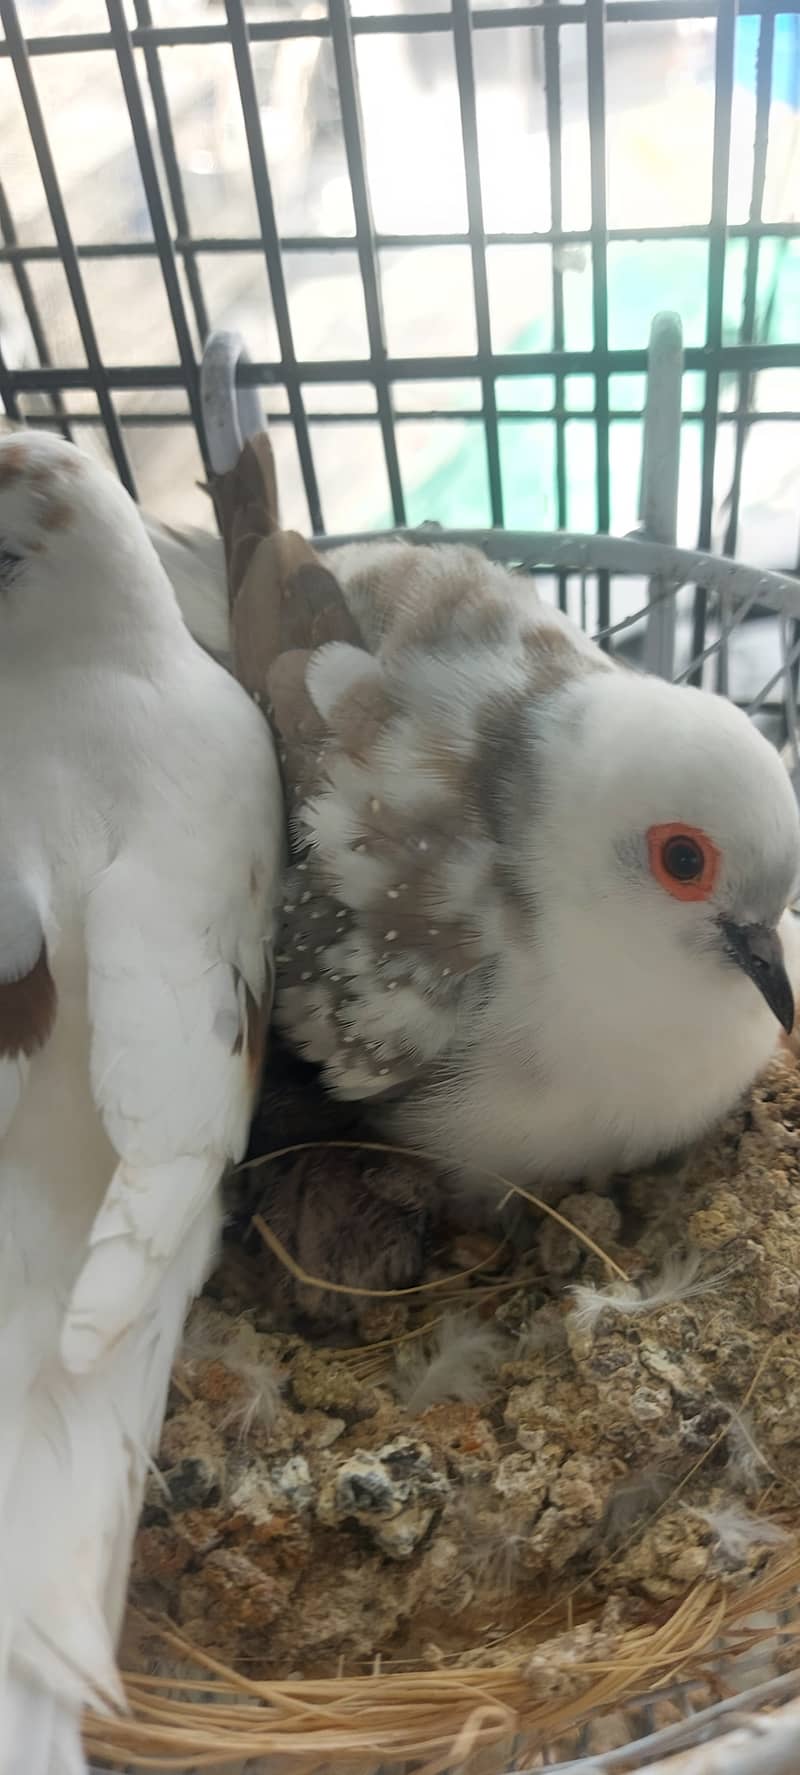 High quality Diamond pied dove breeder setup patha and ready to breed 8